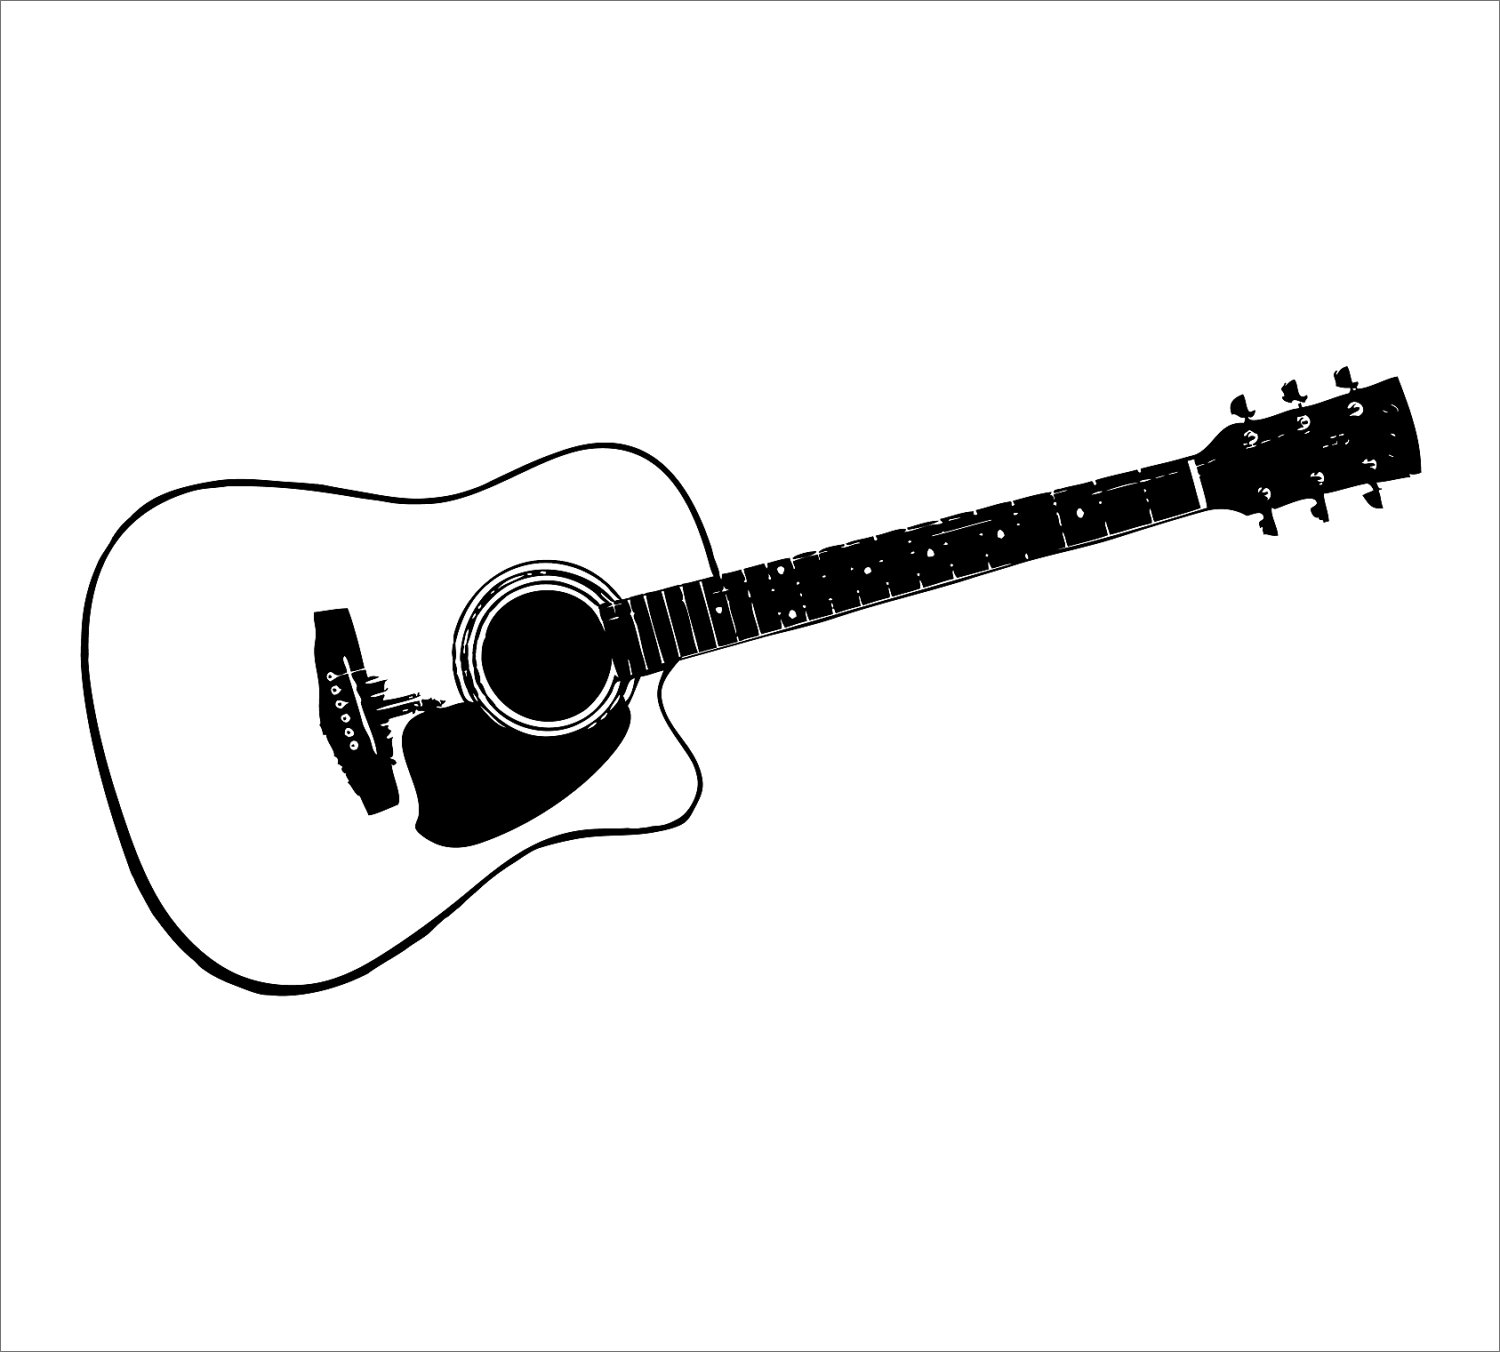 Free guitar clipart images